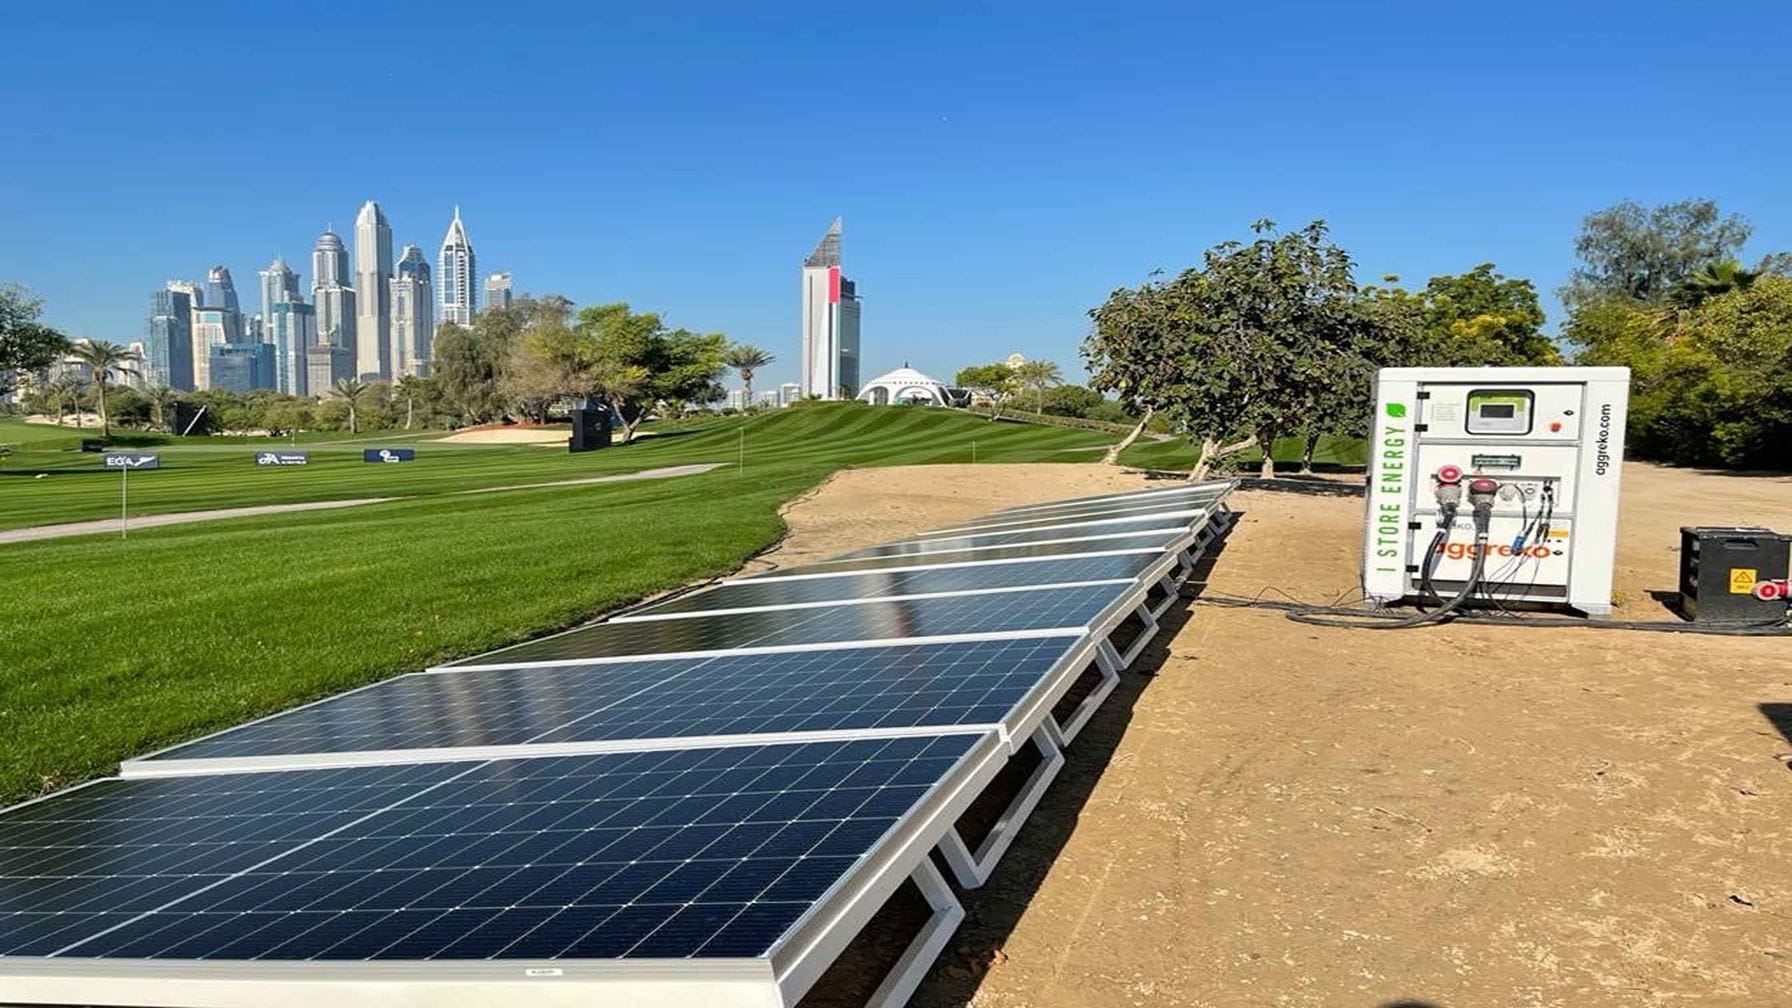 Innovative green energy solution for world class golf tour using solar power batteries and biofuel